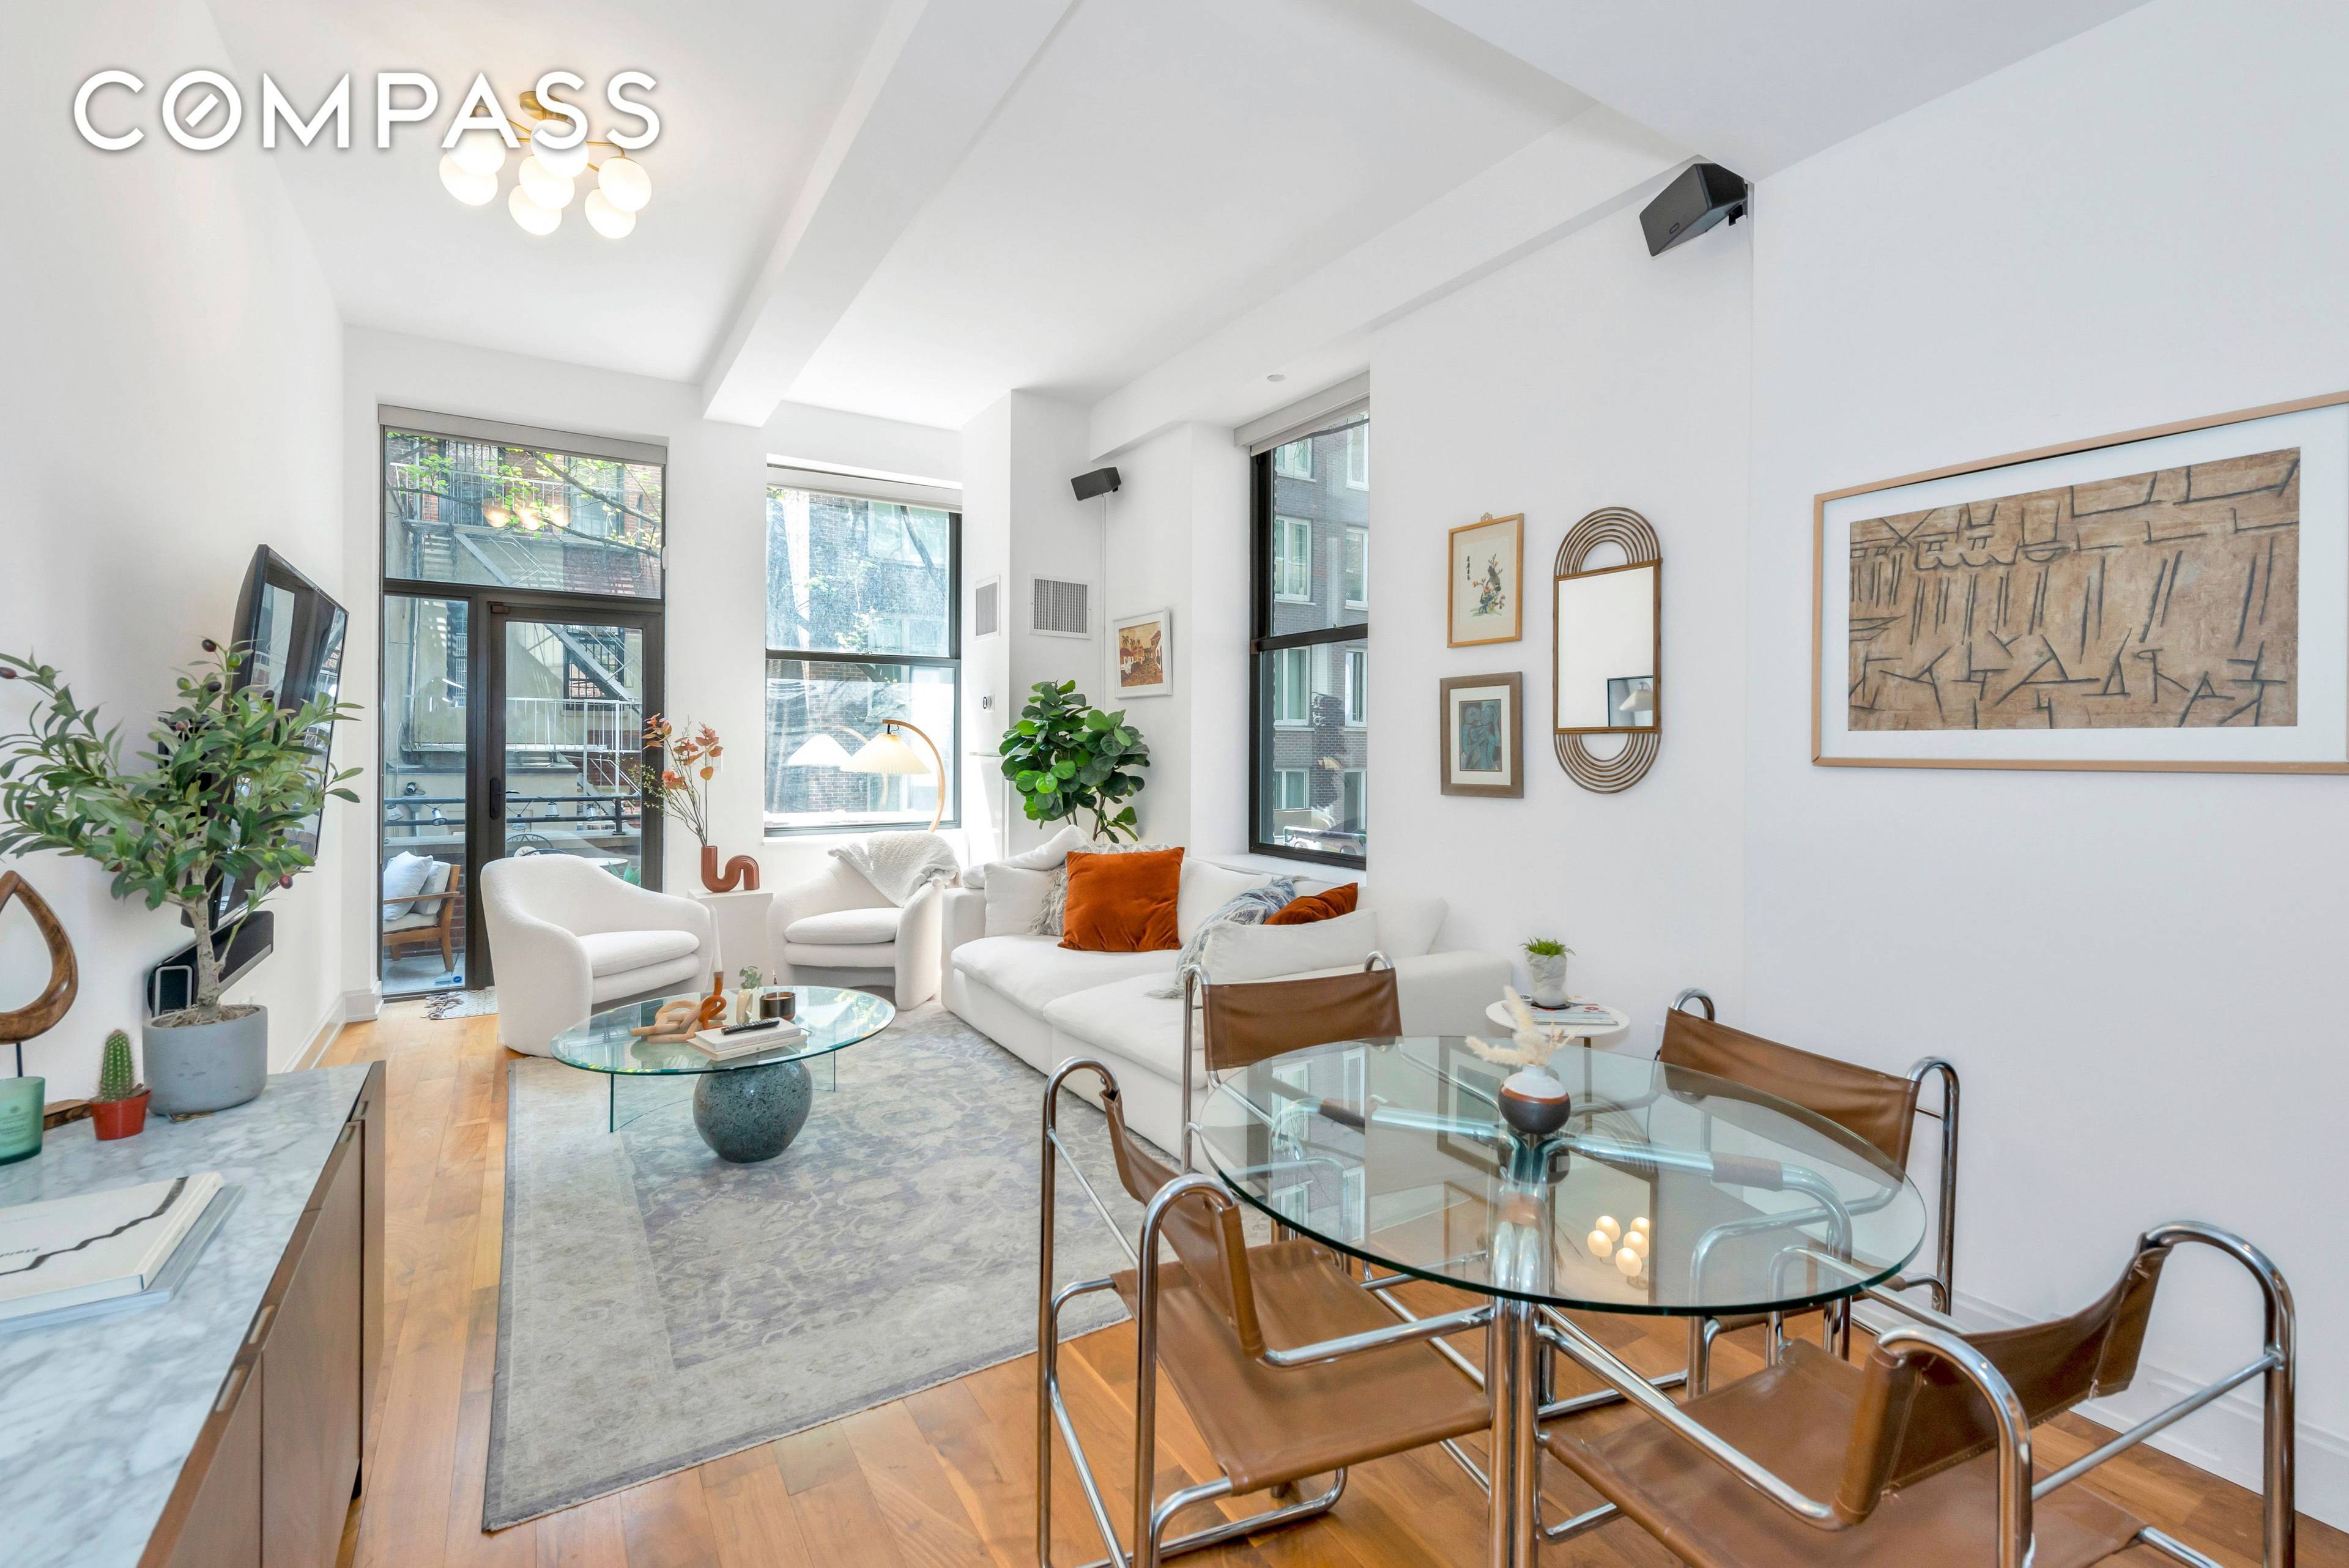 Experience luxurious urban living at its finest in this stunning 1 bedroom, 2 bathroom apartment located in the heart of Chelsea.